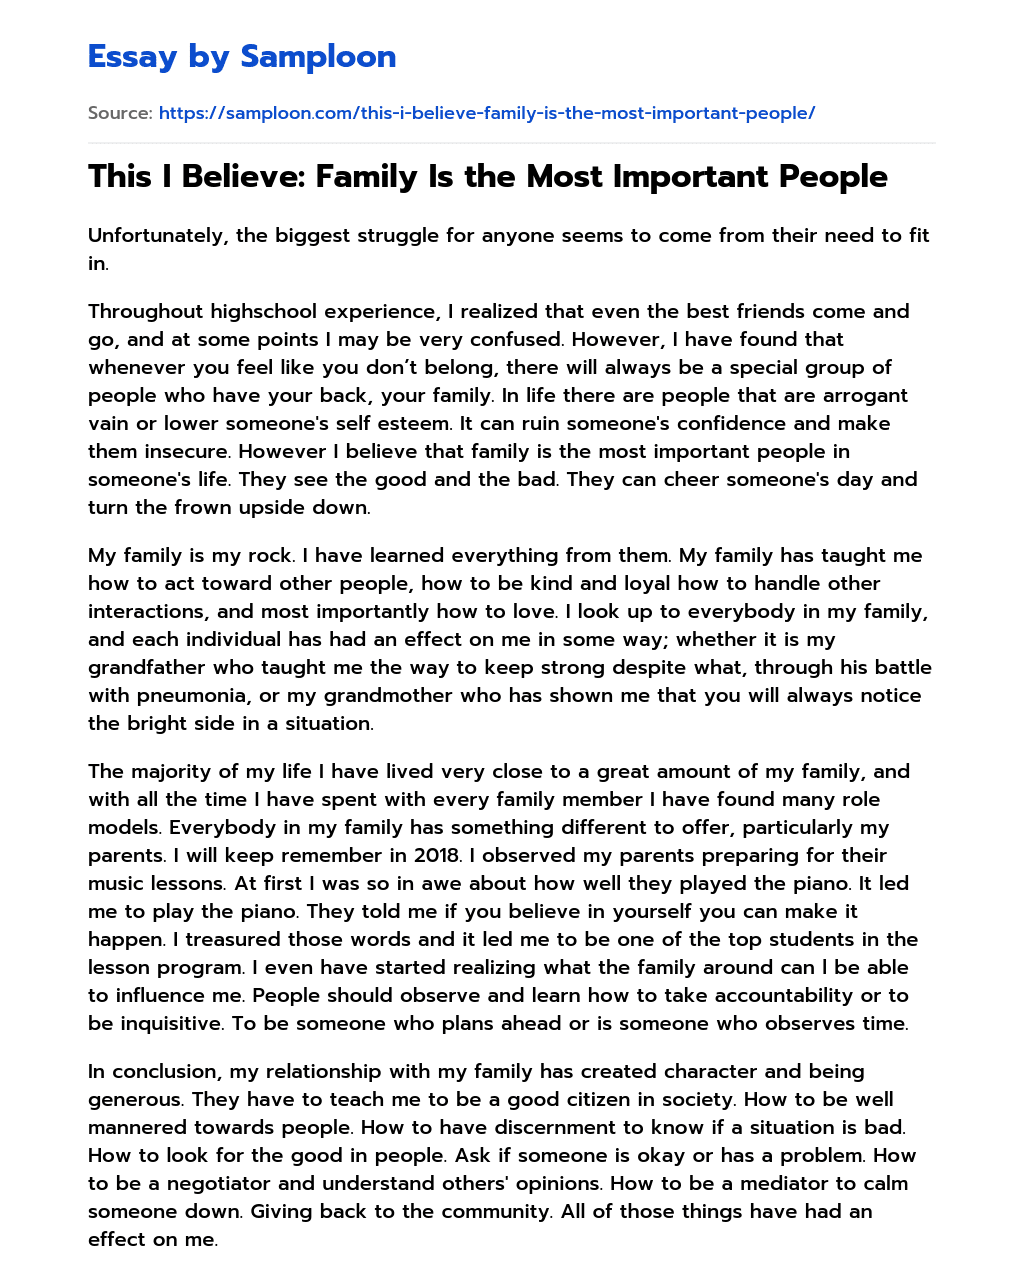 This I Believe: Family Is the Most Important People essay